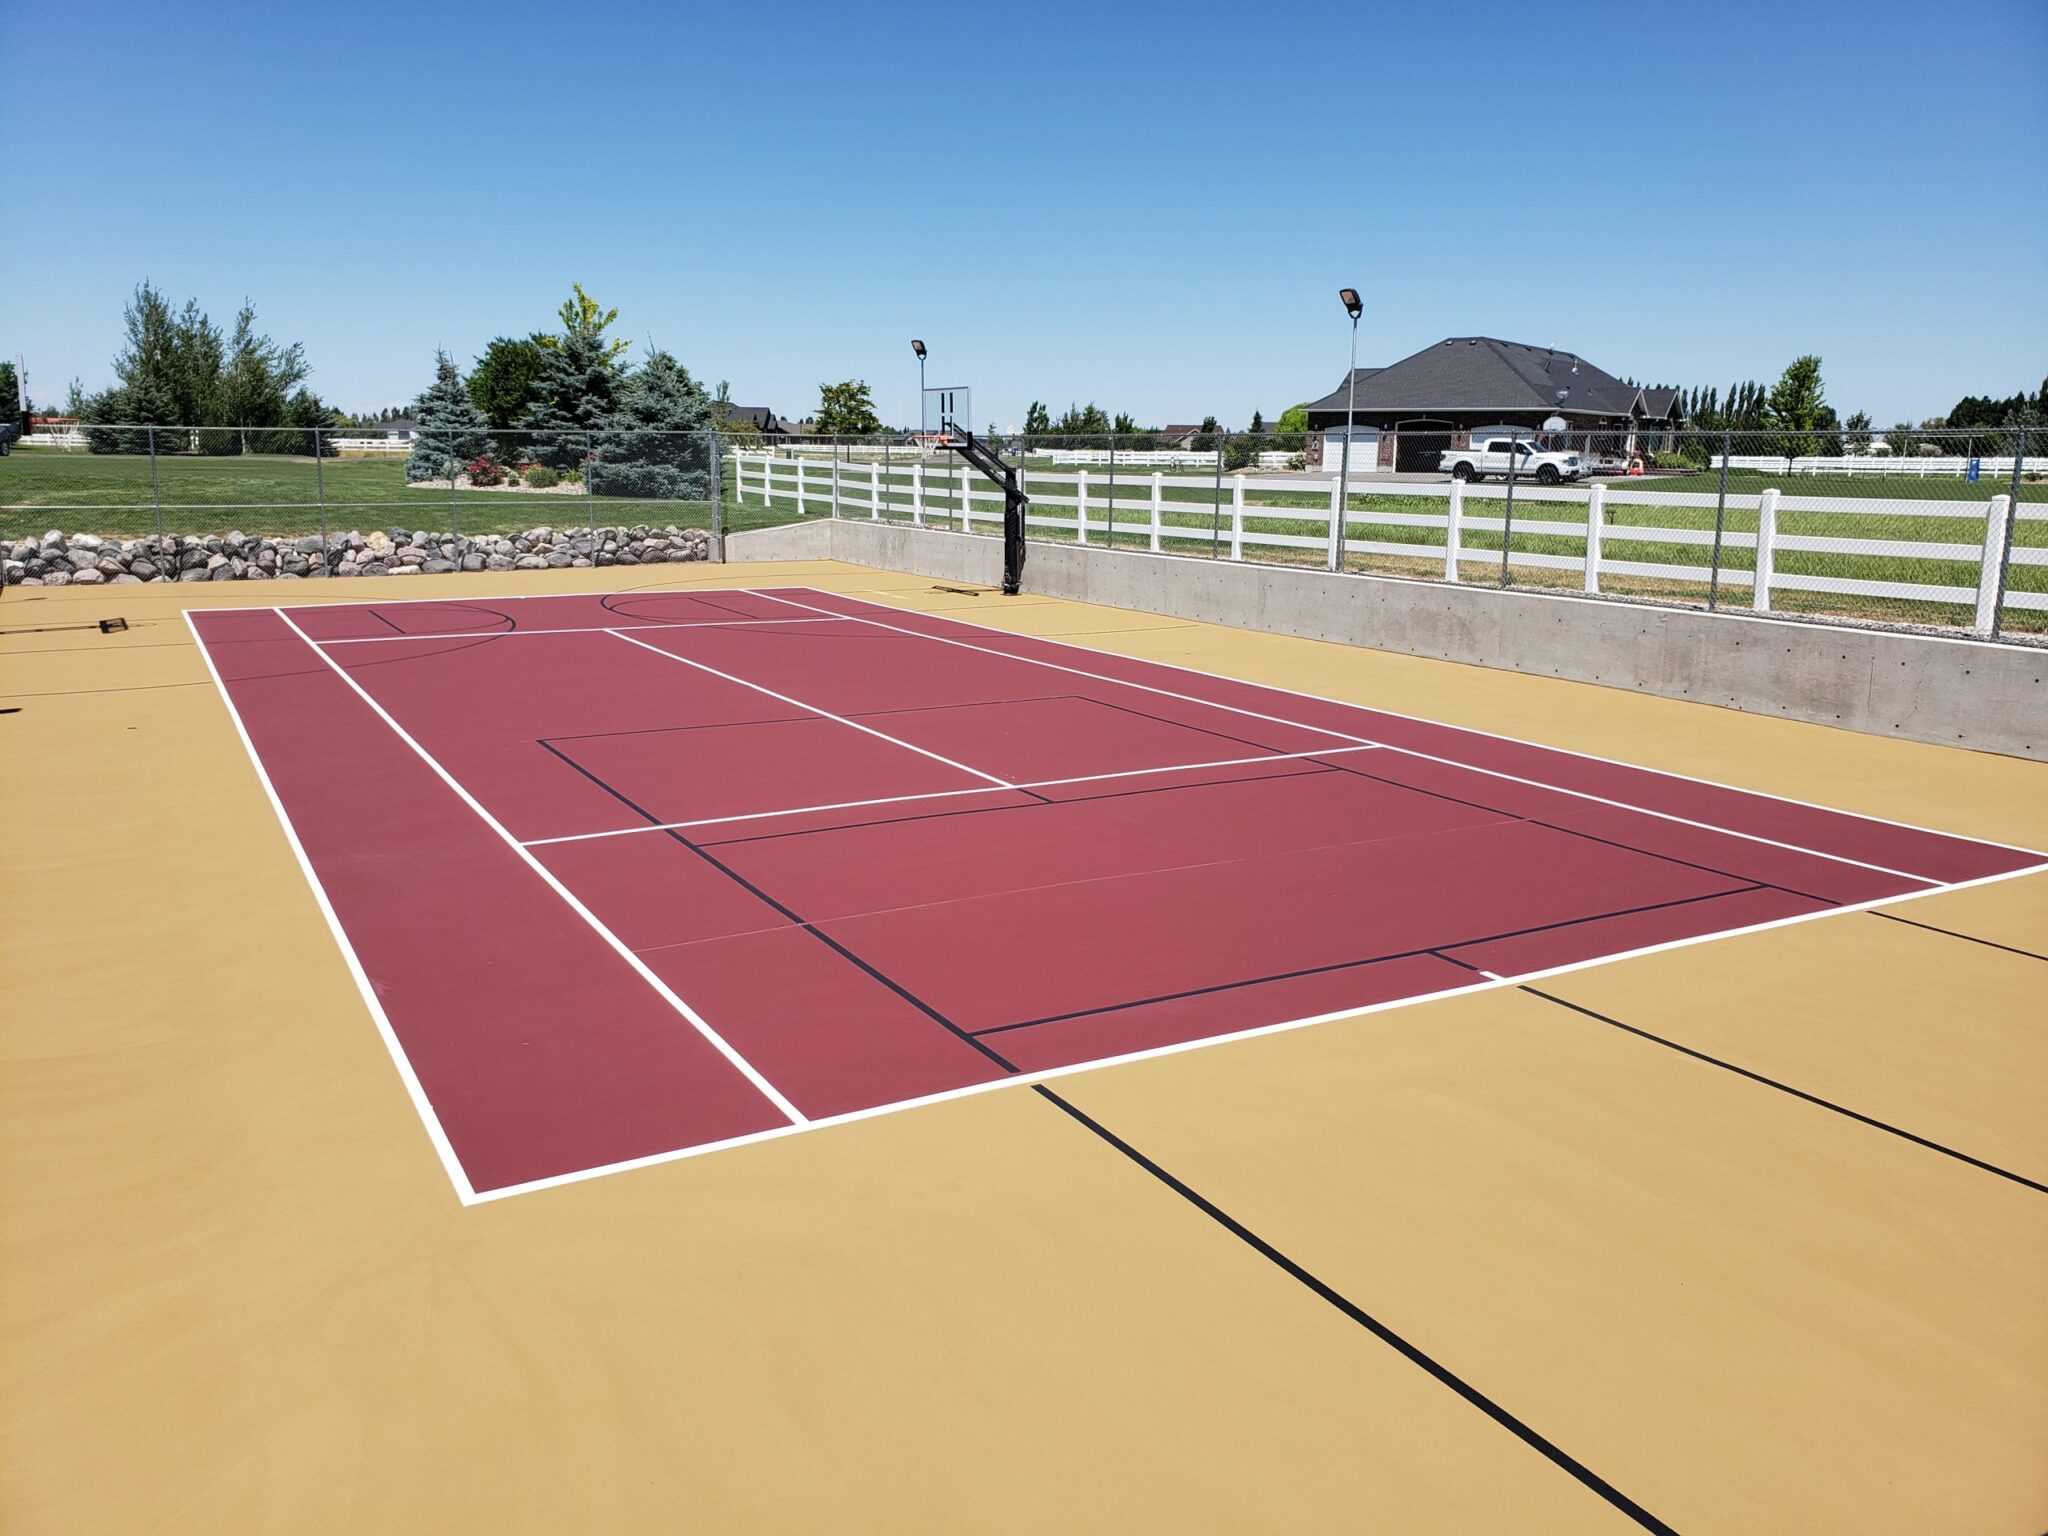 A newly surfaced tennis, pickleball, and basketball court with red, white, and tan colors.